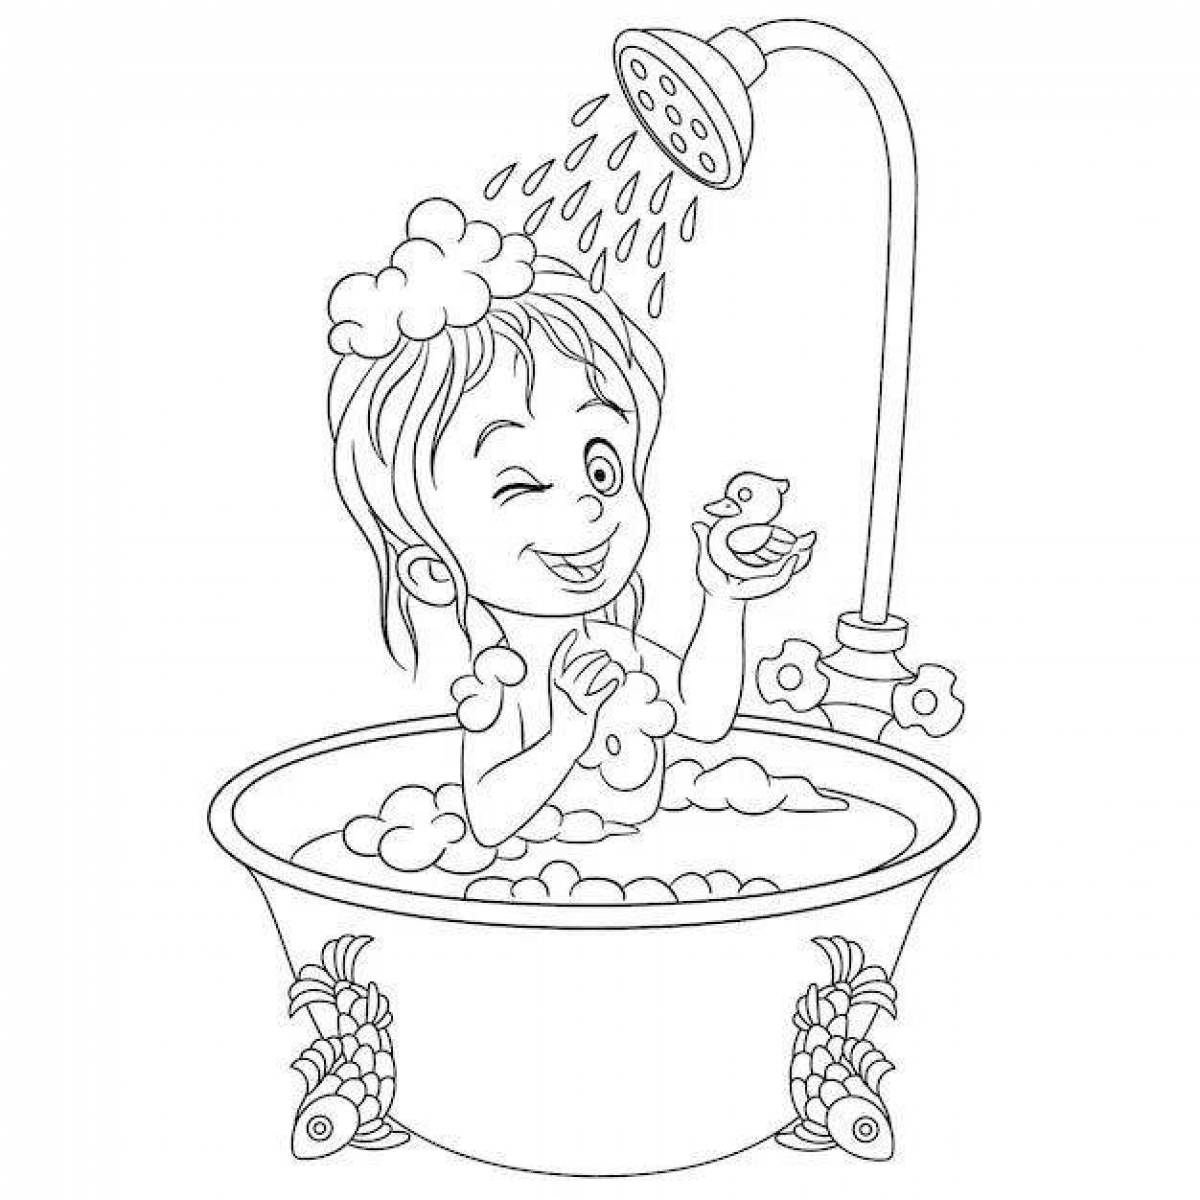 Exciting shower coloring book